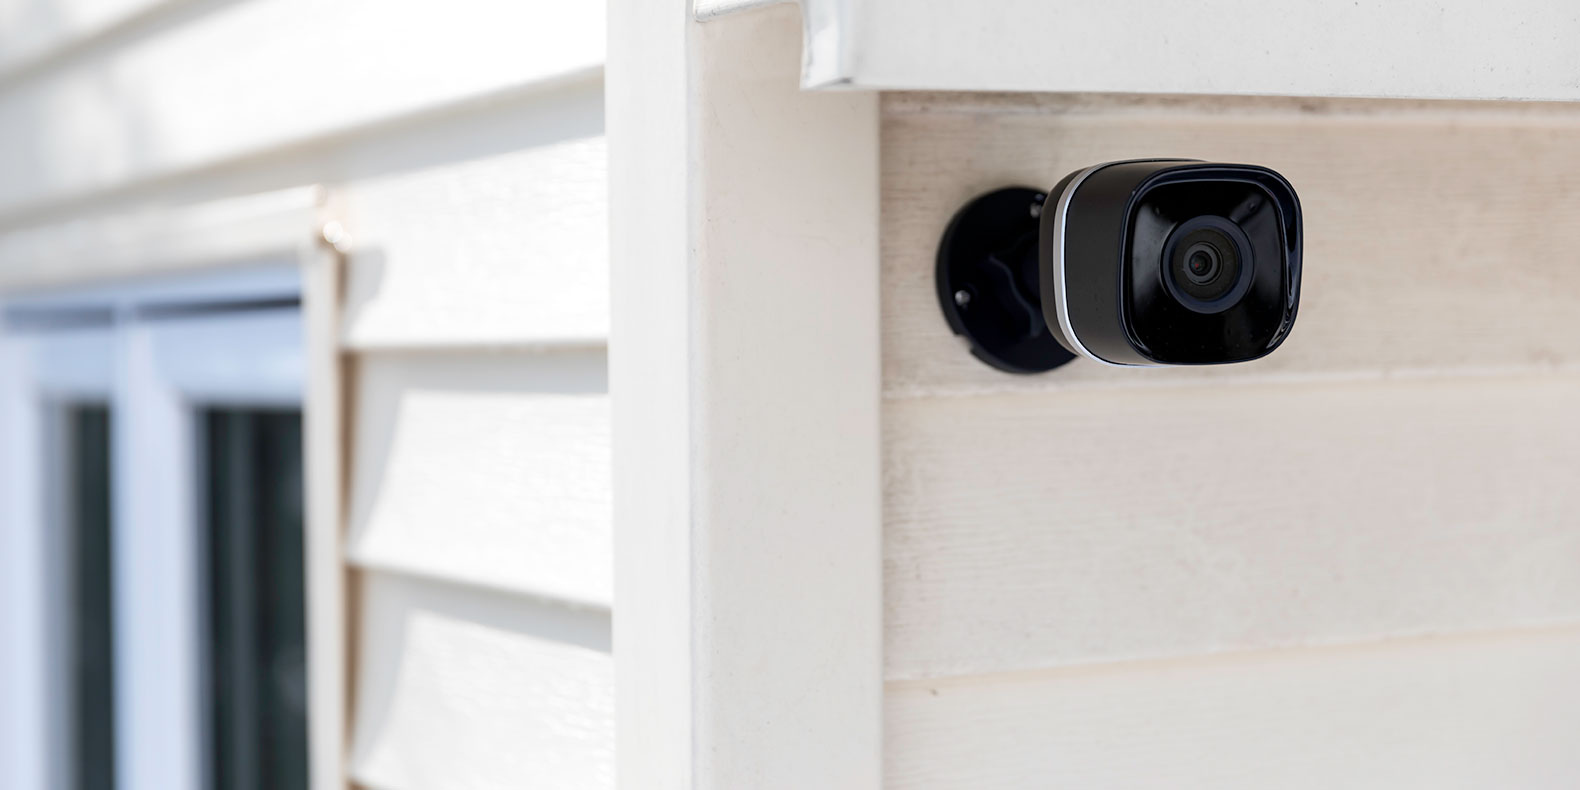 How To Find A Neighbor’s Outdoor Cameras